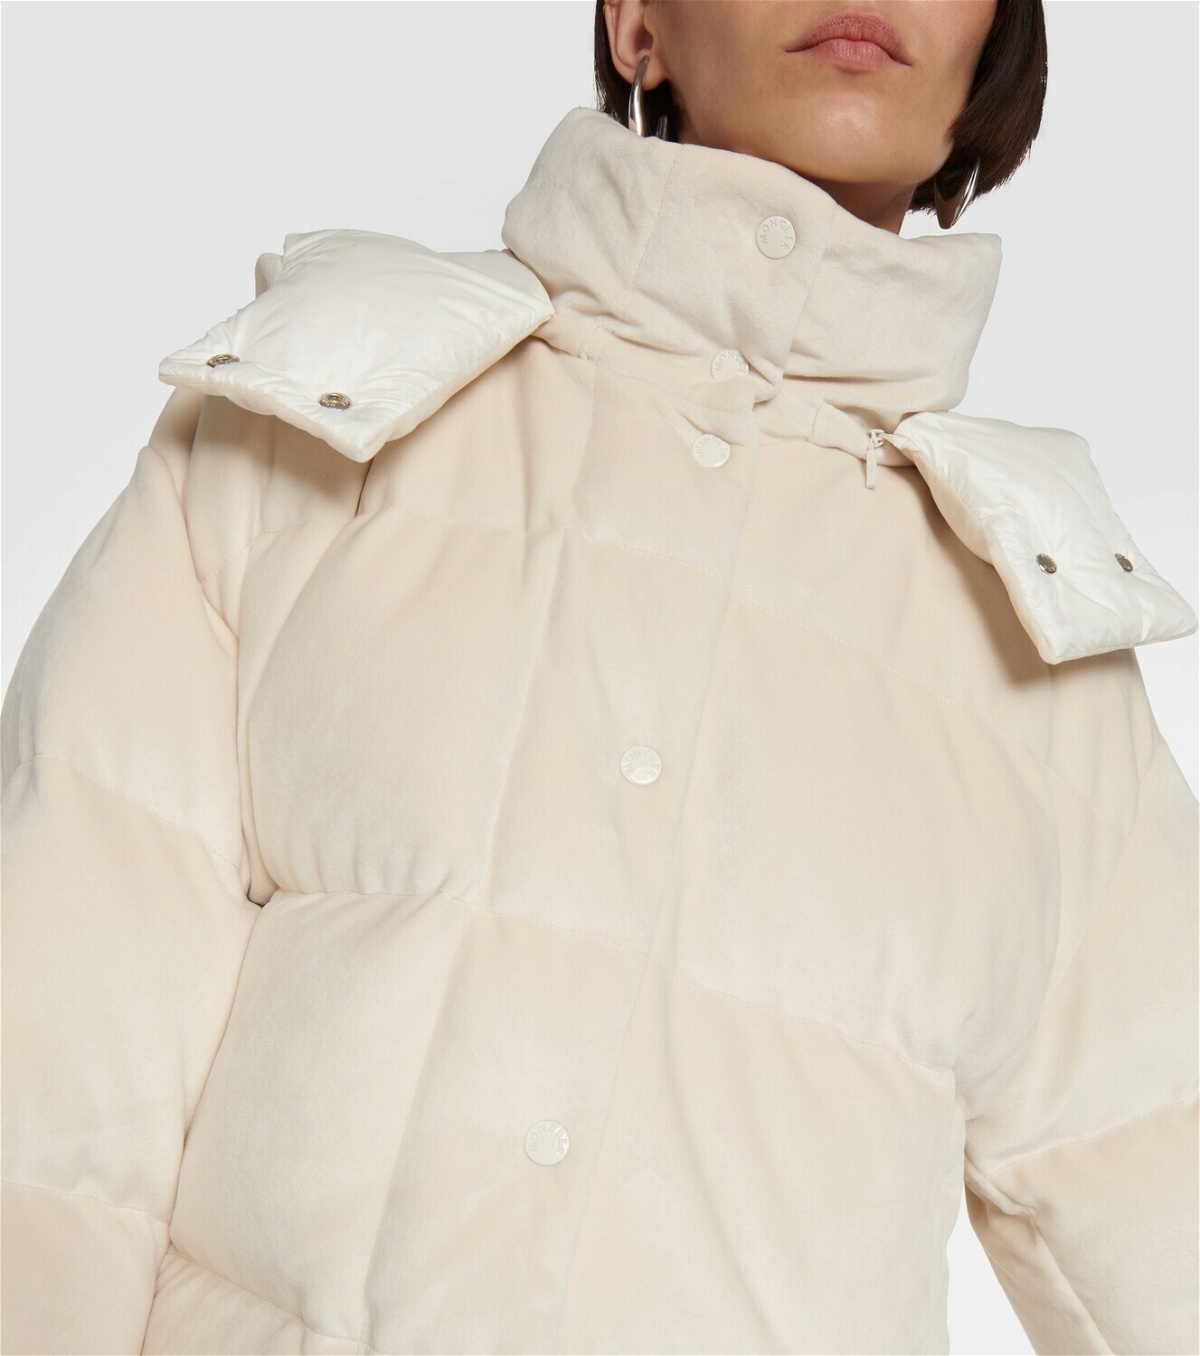 Moncler Daos chenille down jacket Moncler